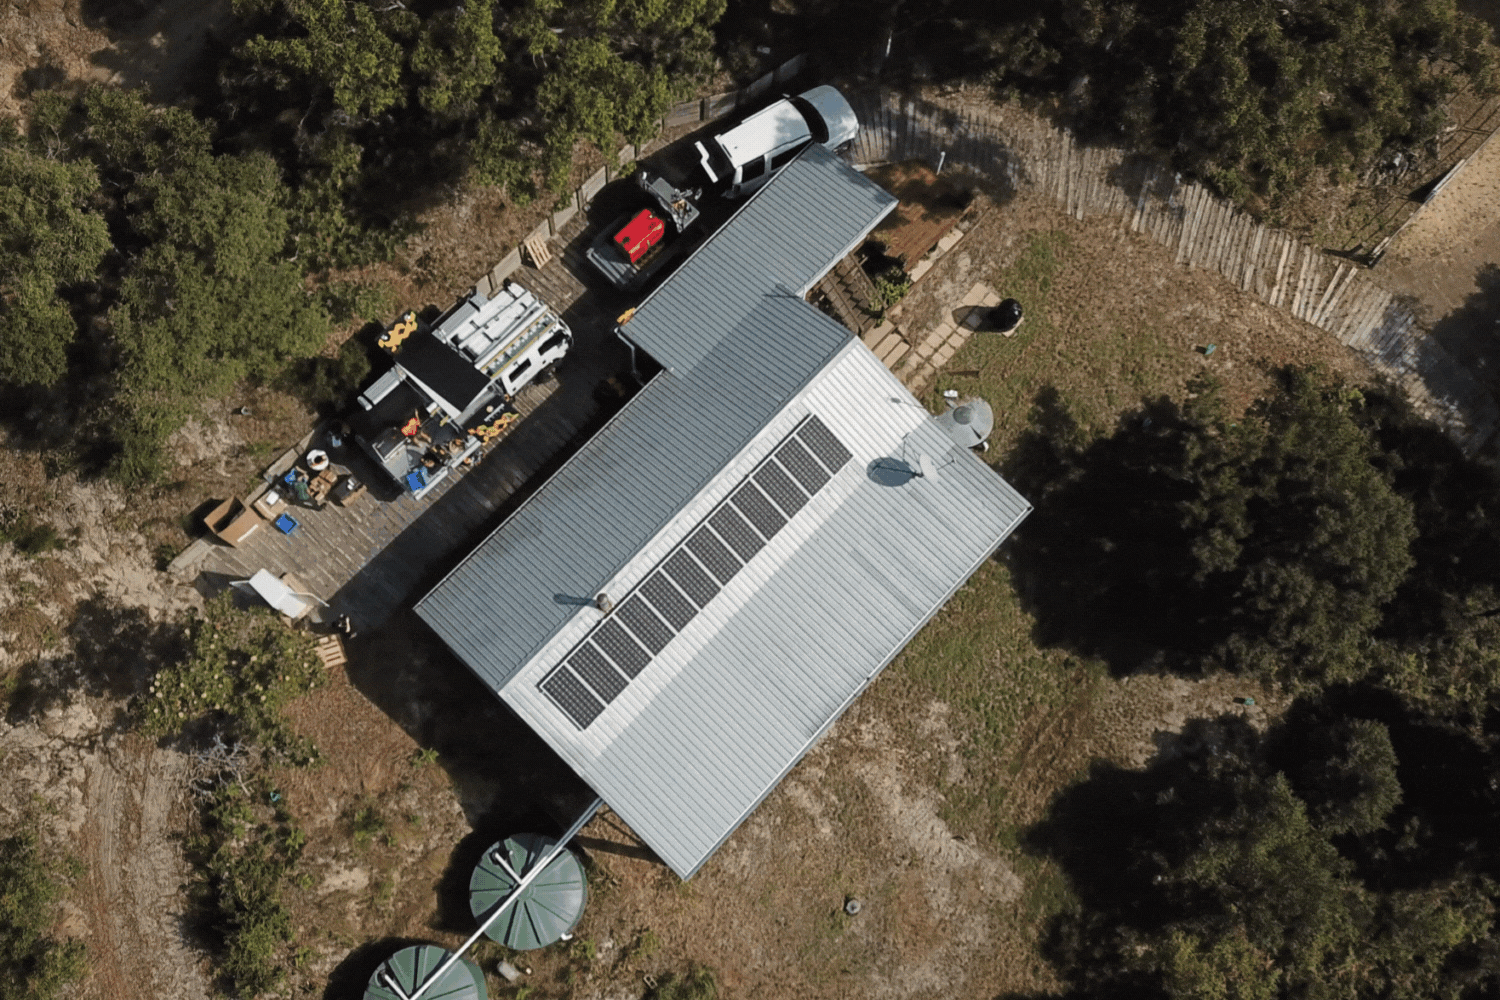 Springers Solar off Grid Home Before and After Solar Array